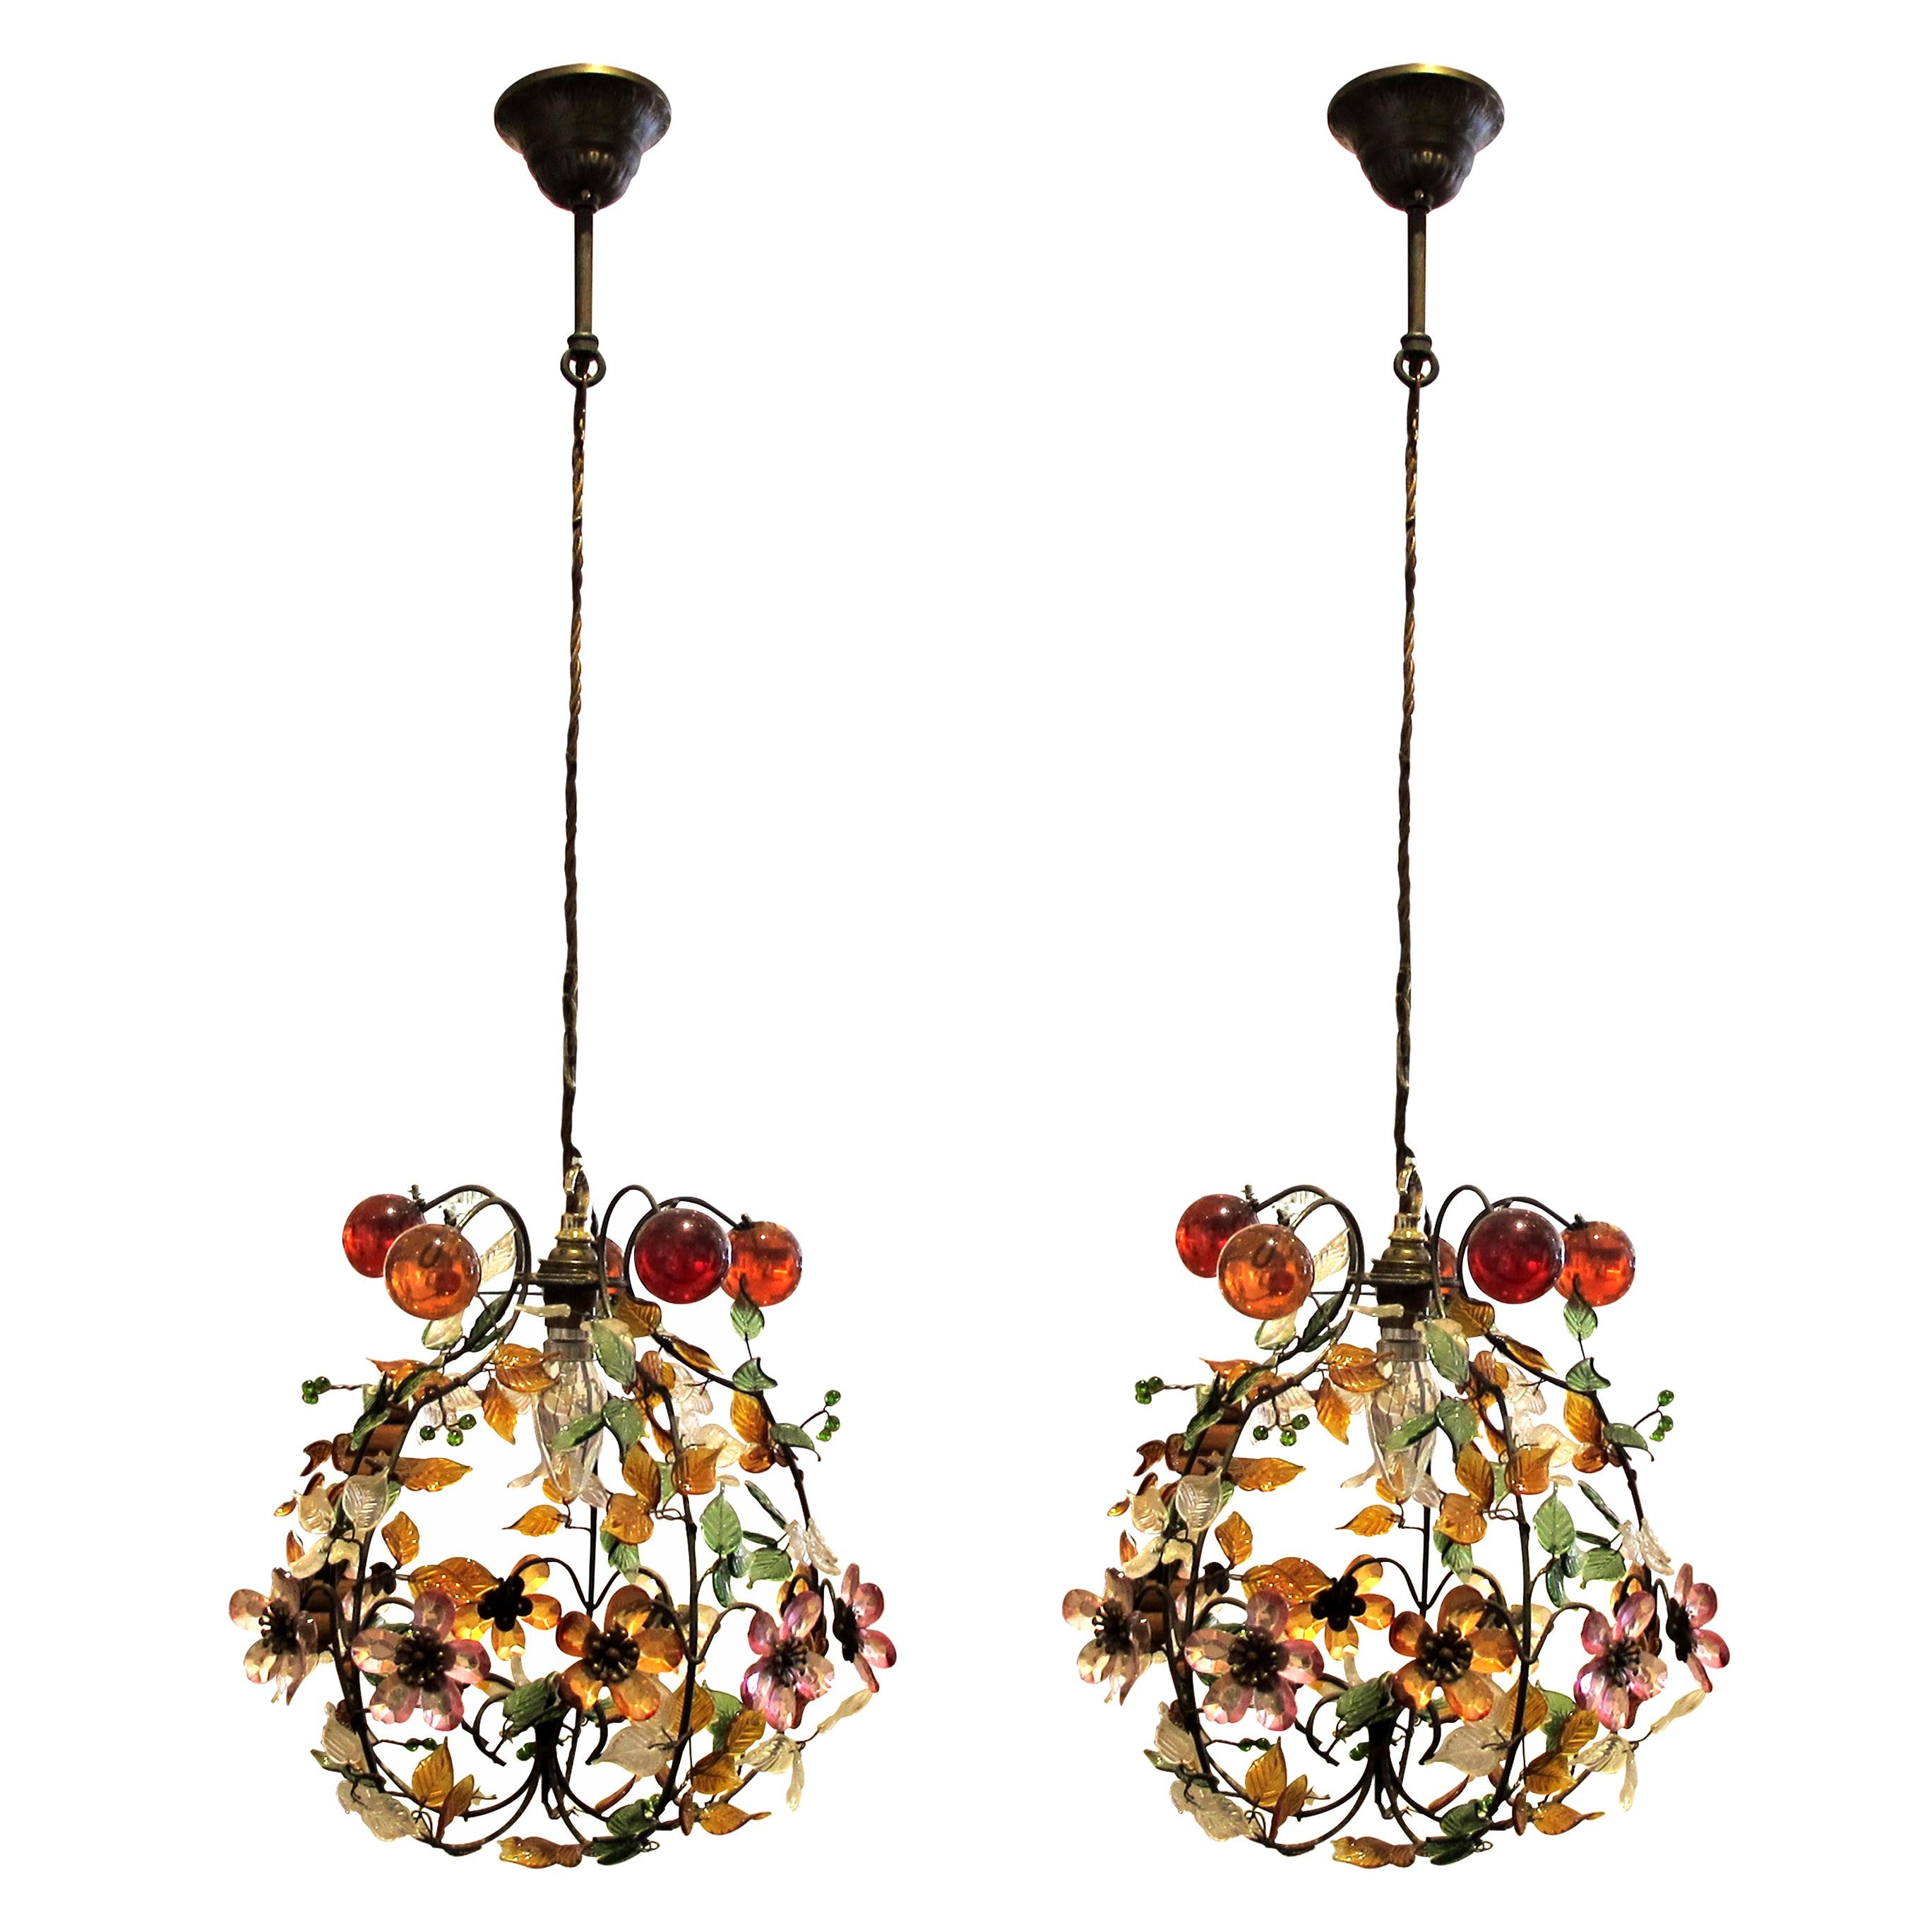 Pair of mid century French highly decorative pendant ceiling lights decorated with multi-coloured glass flowers, leaves and acrylic spheres mounted on a metal frame. The ceiling lights have been rewired to UK standards. Each light is fitted with a